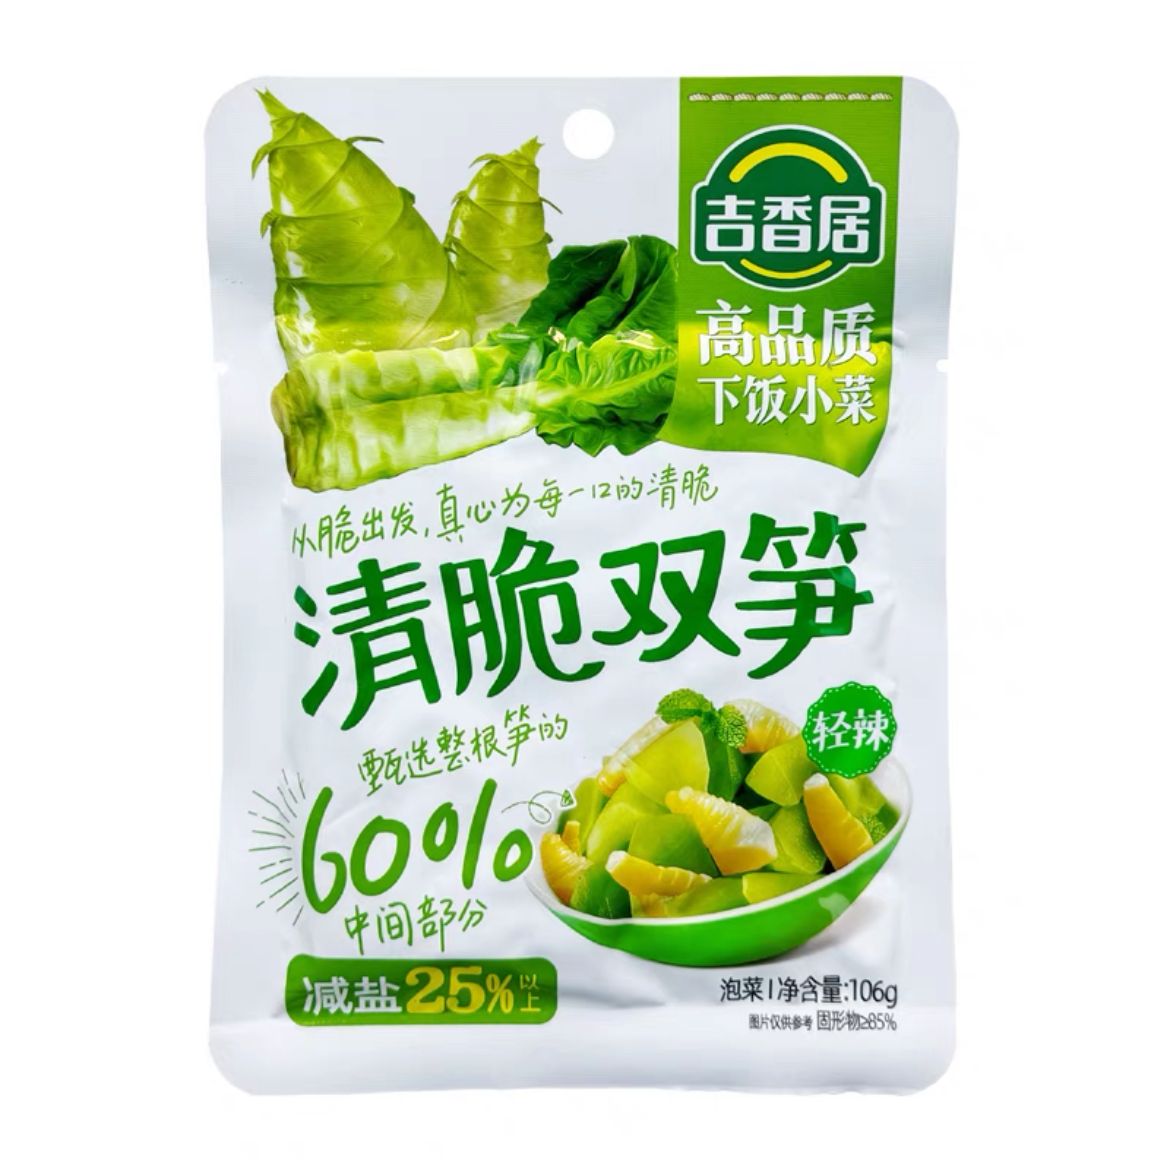 China Jixiangju Crispy Preserved Mustard Asparagus Bamboo Delicious 106g Appetizers Suitable For Children Reduce Salt 25%